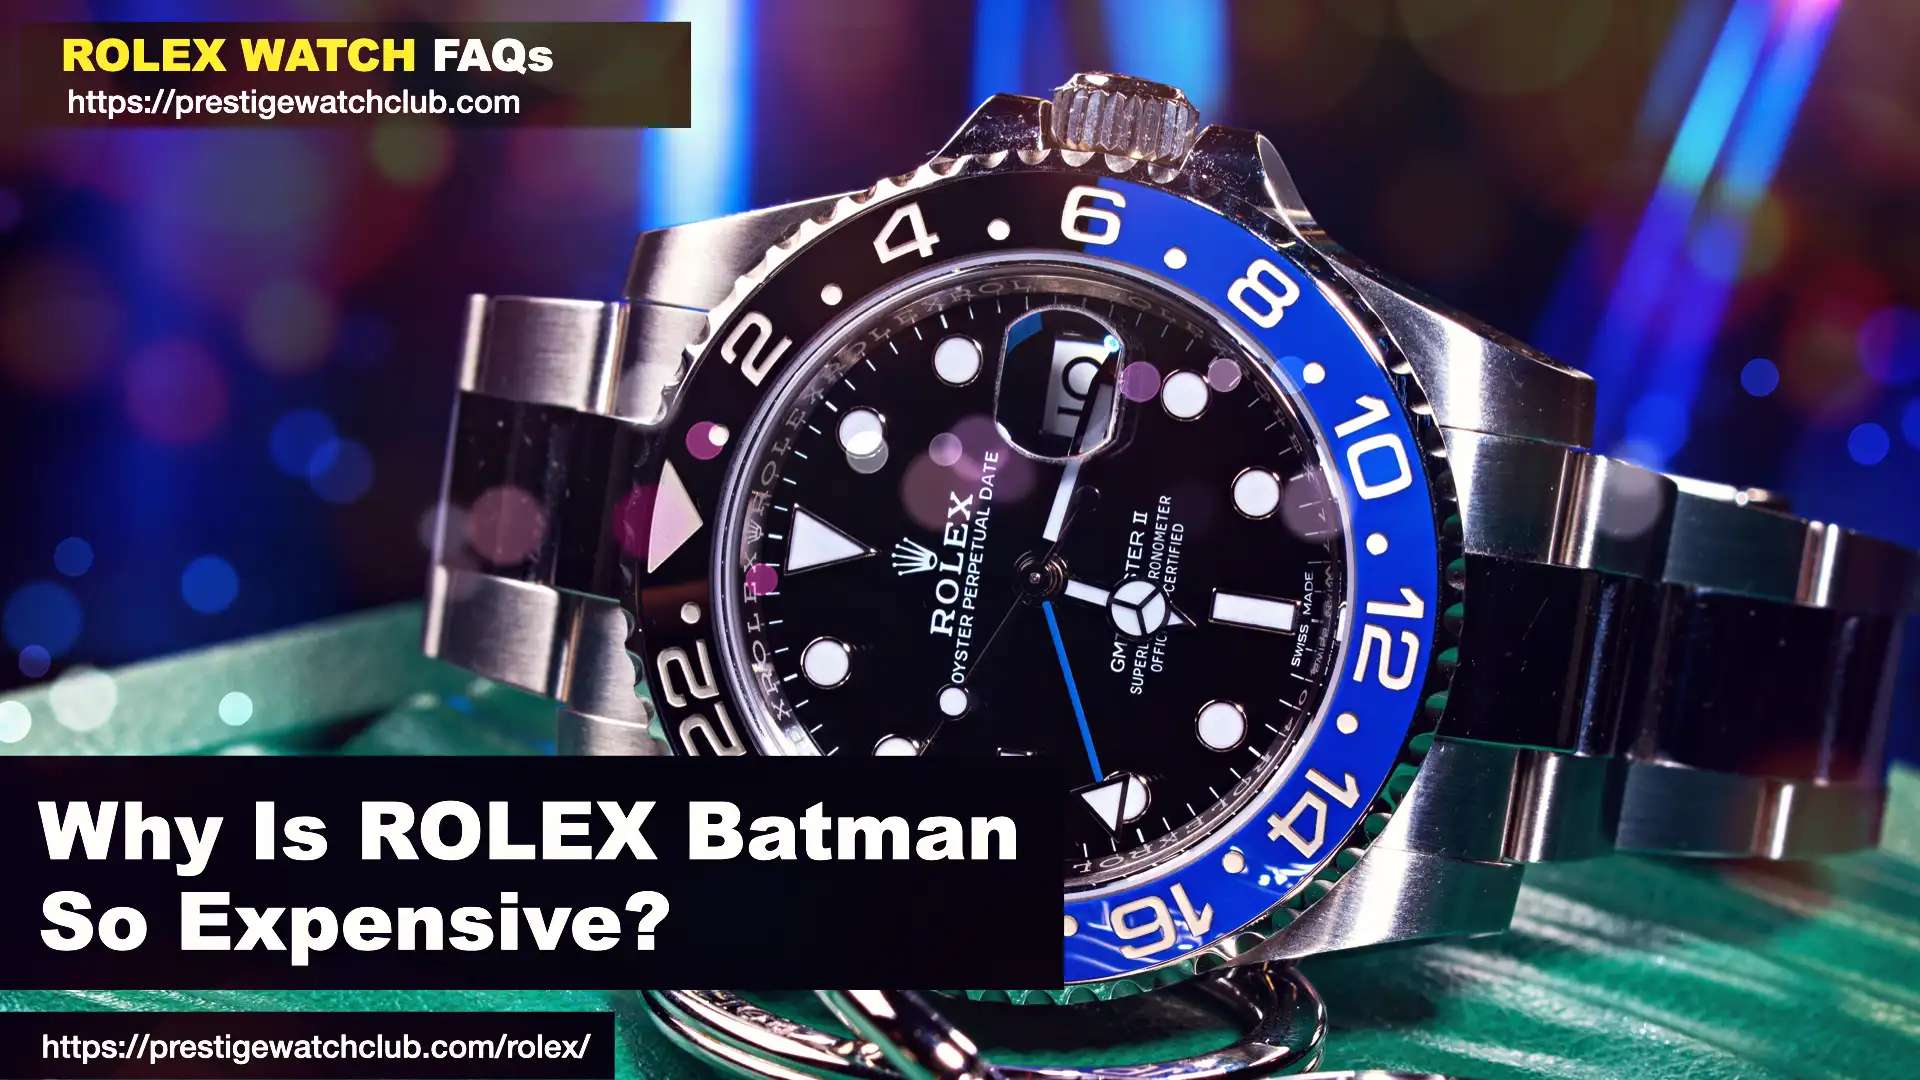 Why Is Rolex Batman So Expensive?